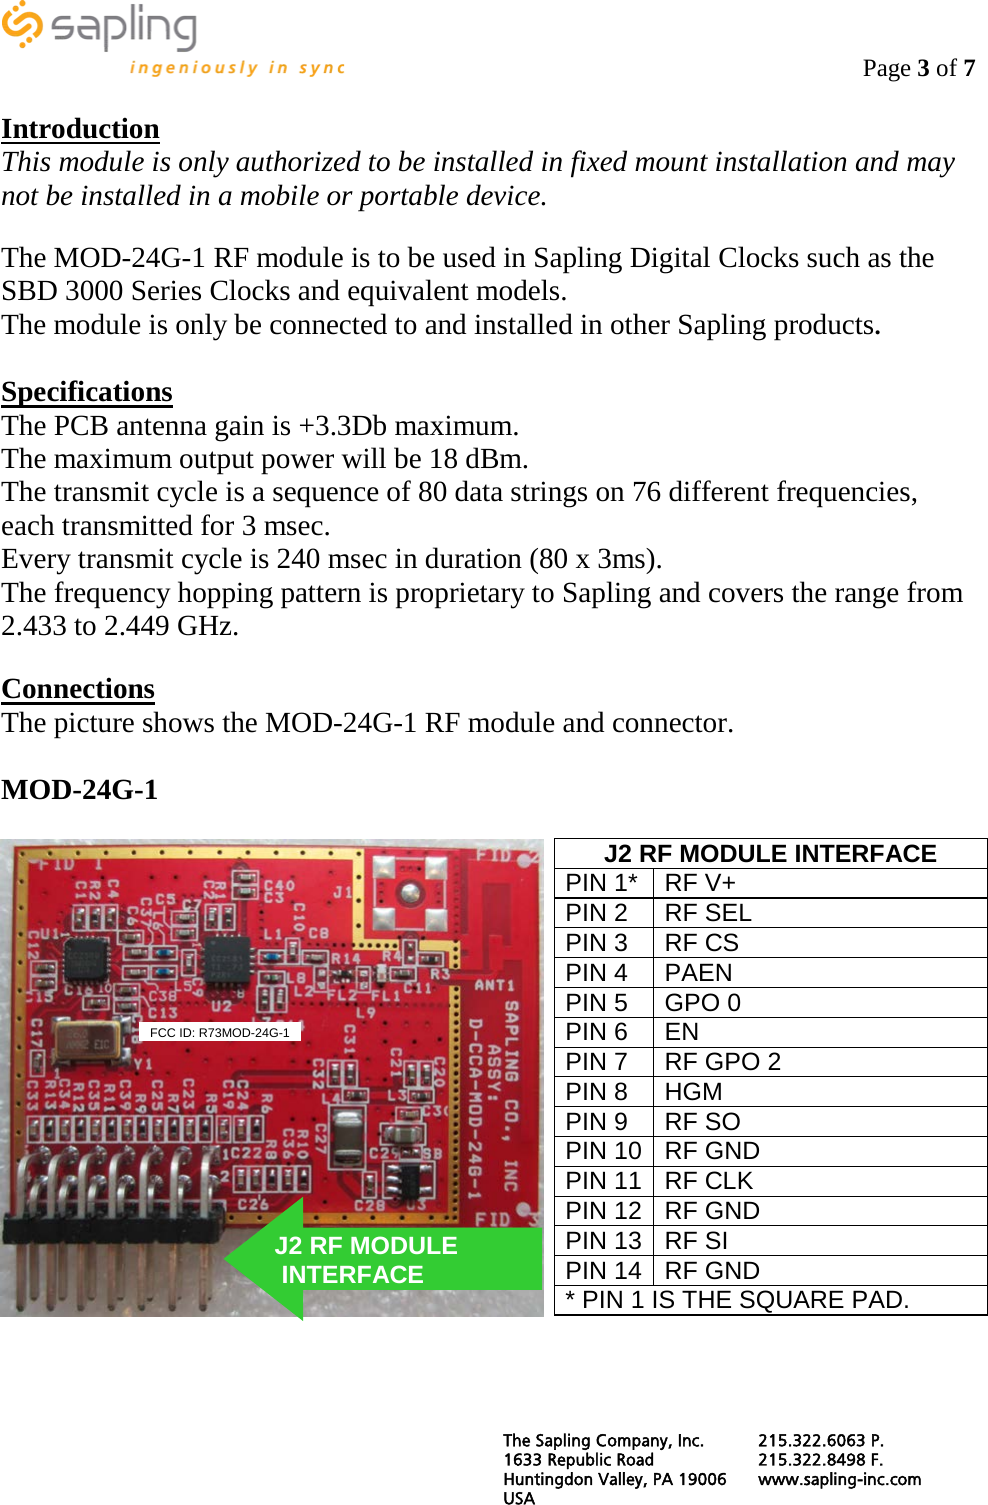                                                                                    Page 3 of 7  Introduction This module is only authorized to be installed in fixed mount installation and may not be installed in a mobile or portable device.  The MOD-24G-1 RF module is to be used in Sapling Digital Clocks such as the SBD 3000 Series Clocks and equivalent models. The module is only be connected to and installed in other Sapling products.  Specifications The PCB antenna gain is +3.3Db maximum. The maximum output power will be 18 dBm. The transmit cycle is a sequence of 80 data strings on 76 different frequencies, each transmitted for 3 msec. Every transmit cycle is 240 msec in duration (80 x 3ms). The frequency hopping pattern is proprietary to Sapling and covers the range from 2.433 to 2.449 GHz.  Connections The picture shows the MOD-24G-1 RF module and connector.  MOD-24G-1    J2 RF MODULE INTERFACE PIN 1* RF V+ PIN 2 RF SEL PIN 3 RF CS PIN 4 PAEN PIN 5 GPO 0 PIN 6 EN PIN 7 RF GPO 2 PIN 8 HGM PIN 9 RF SO PIN 10 RF GND PIN 11 RF CLK PIN 12 RF GND PIN 13 RF SI PIN 14 RF GND * PIN 1 IS THE SQUARE PAD. J2 RF MODULE  INTERFACE  FCC ID: R73MOD-24G-1 The Sapling Company, Inc. 215.322.6063 P. 1633 Republic Road 215.322.8498 F. Huntingdon Valley, PA 19006 www.sapling-inc.com USA   